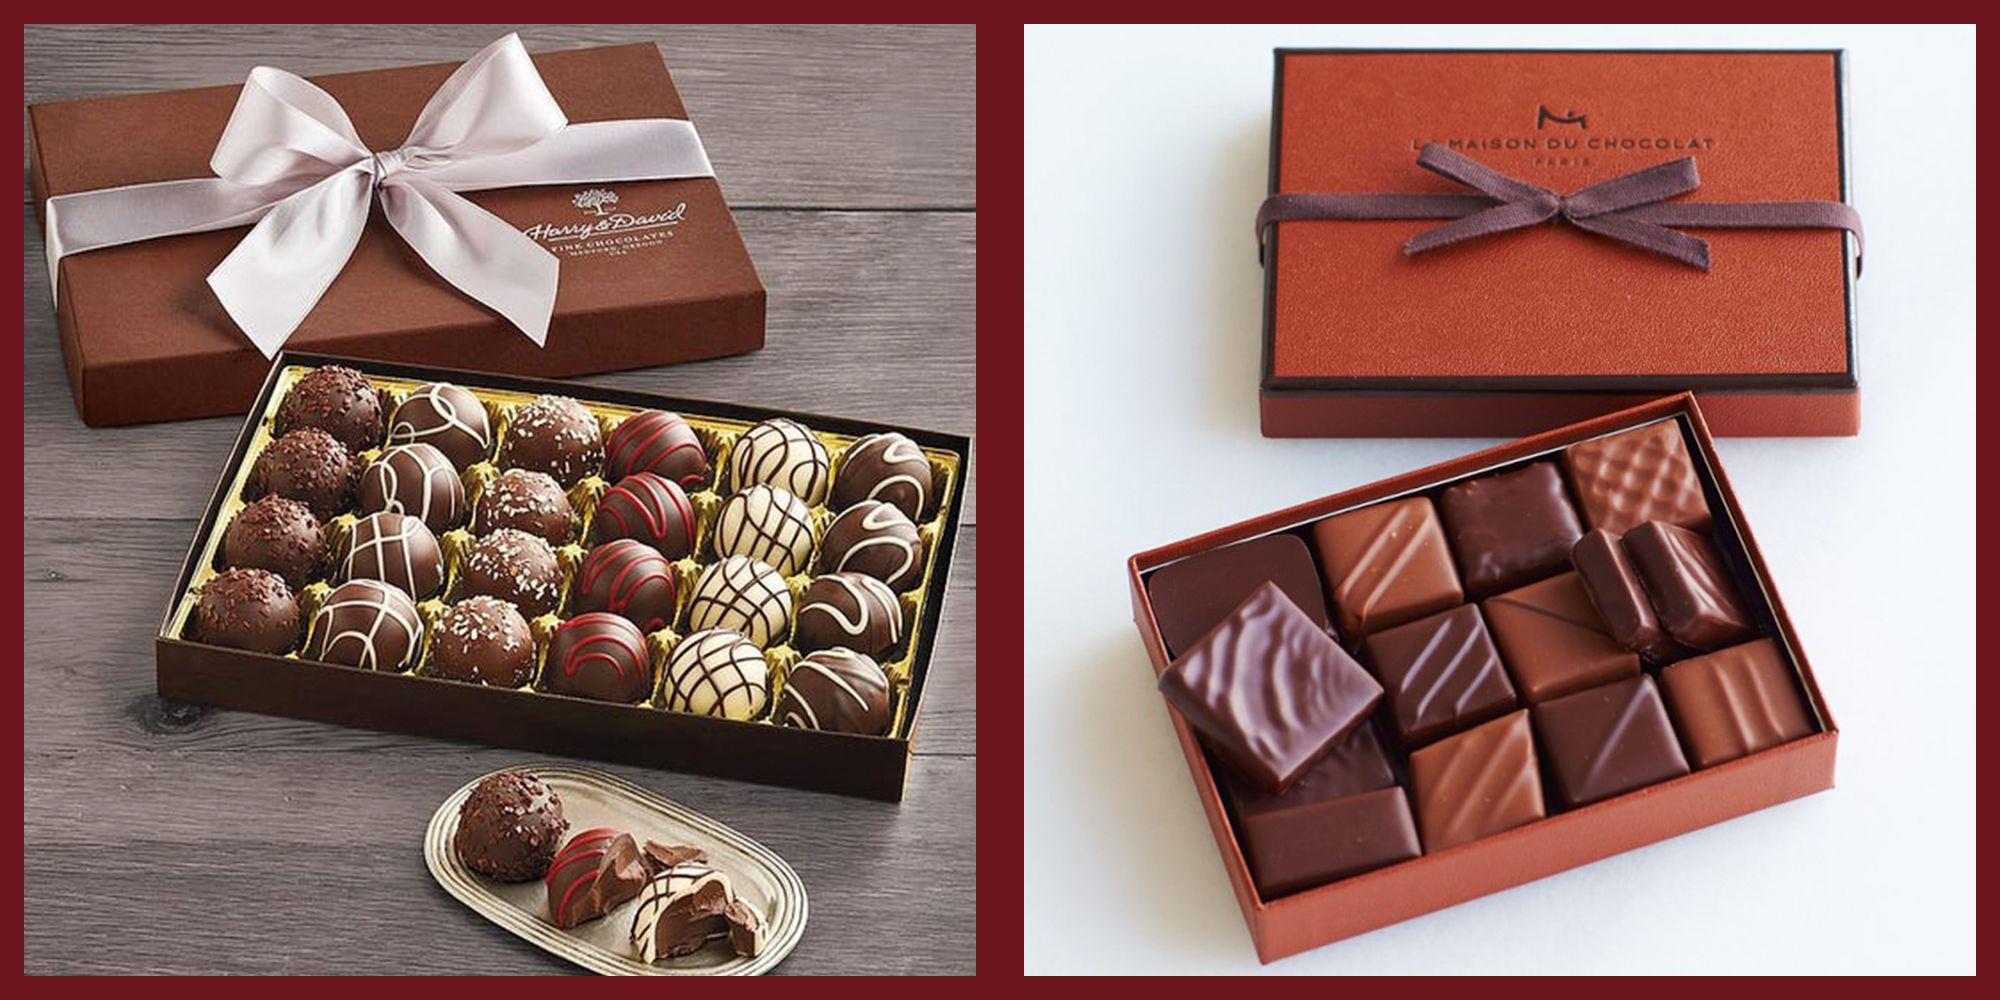 Buy our beloved chocolate photo gift box at